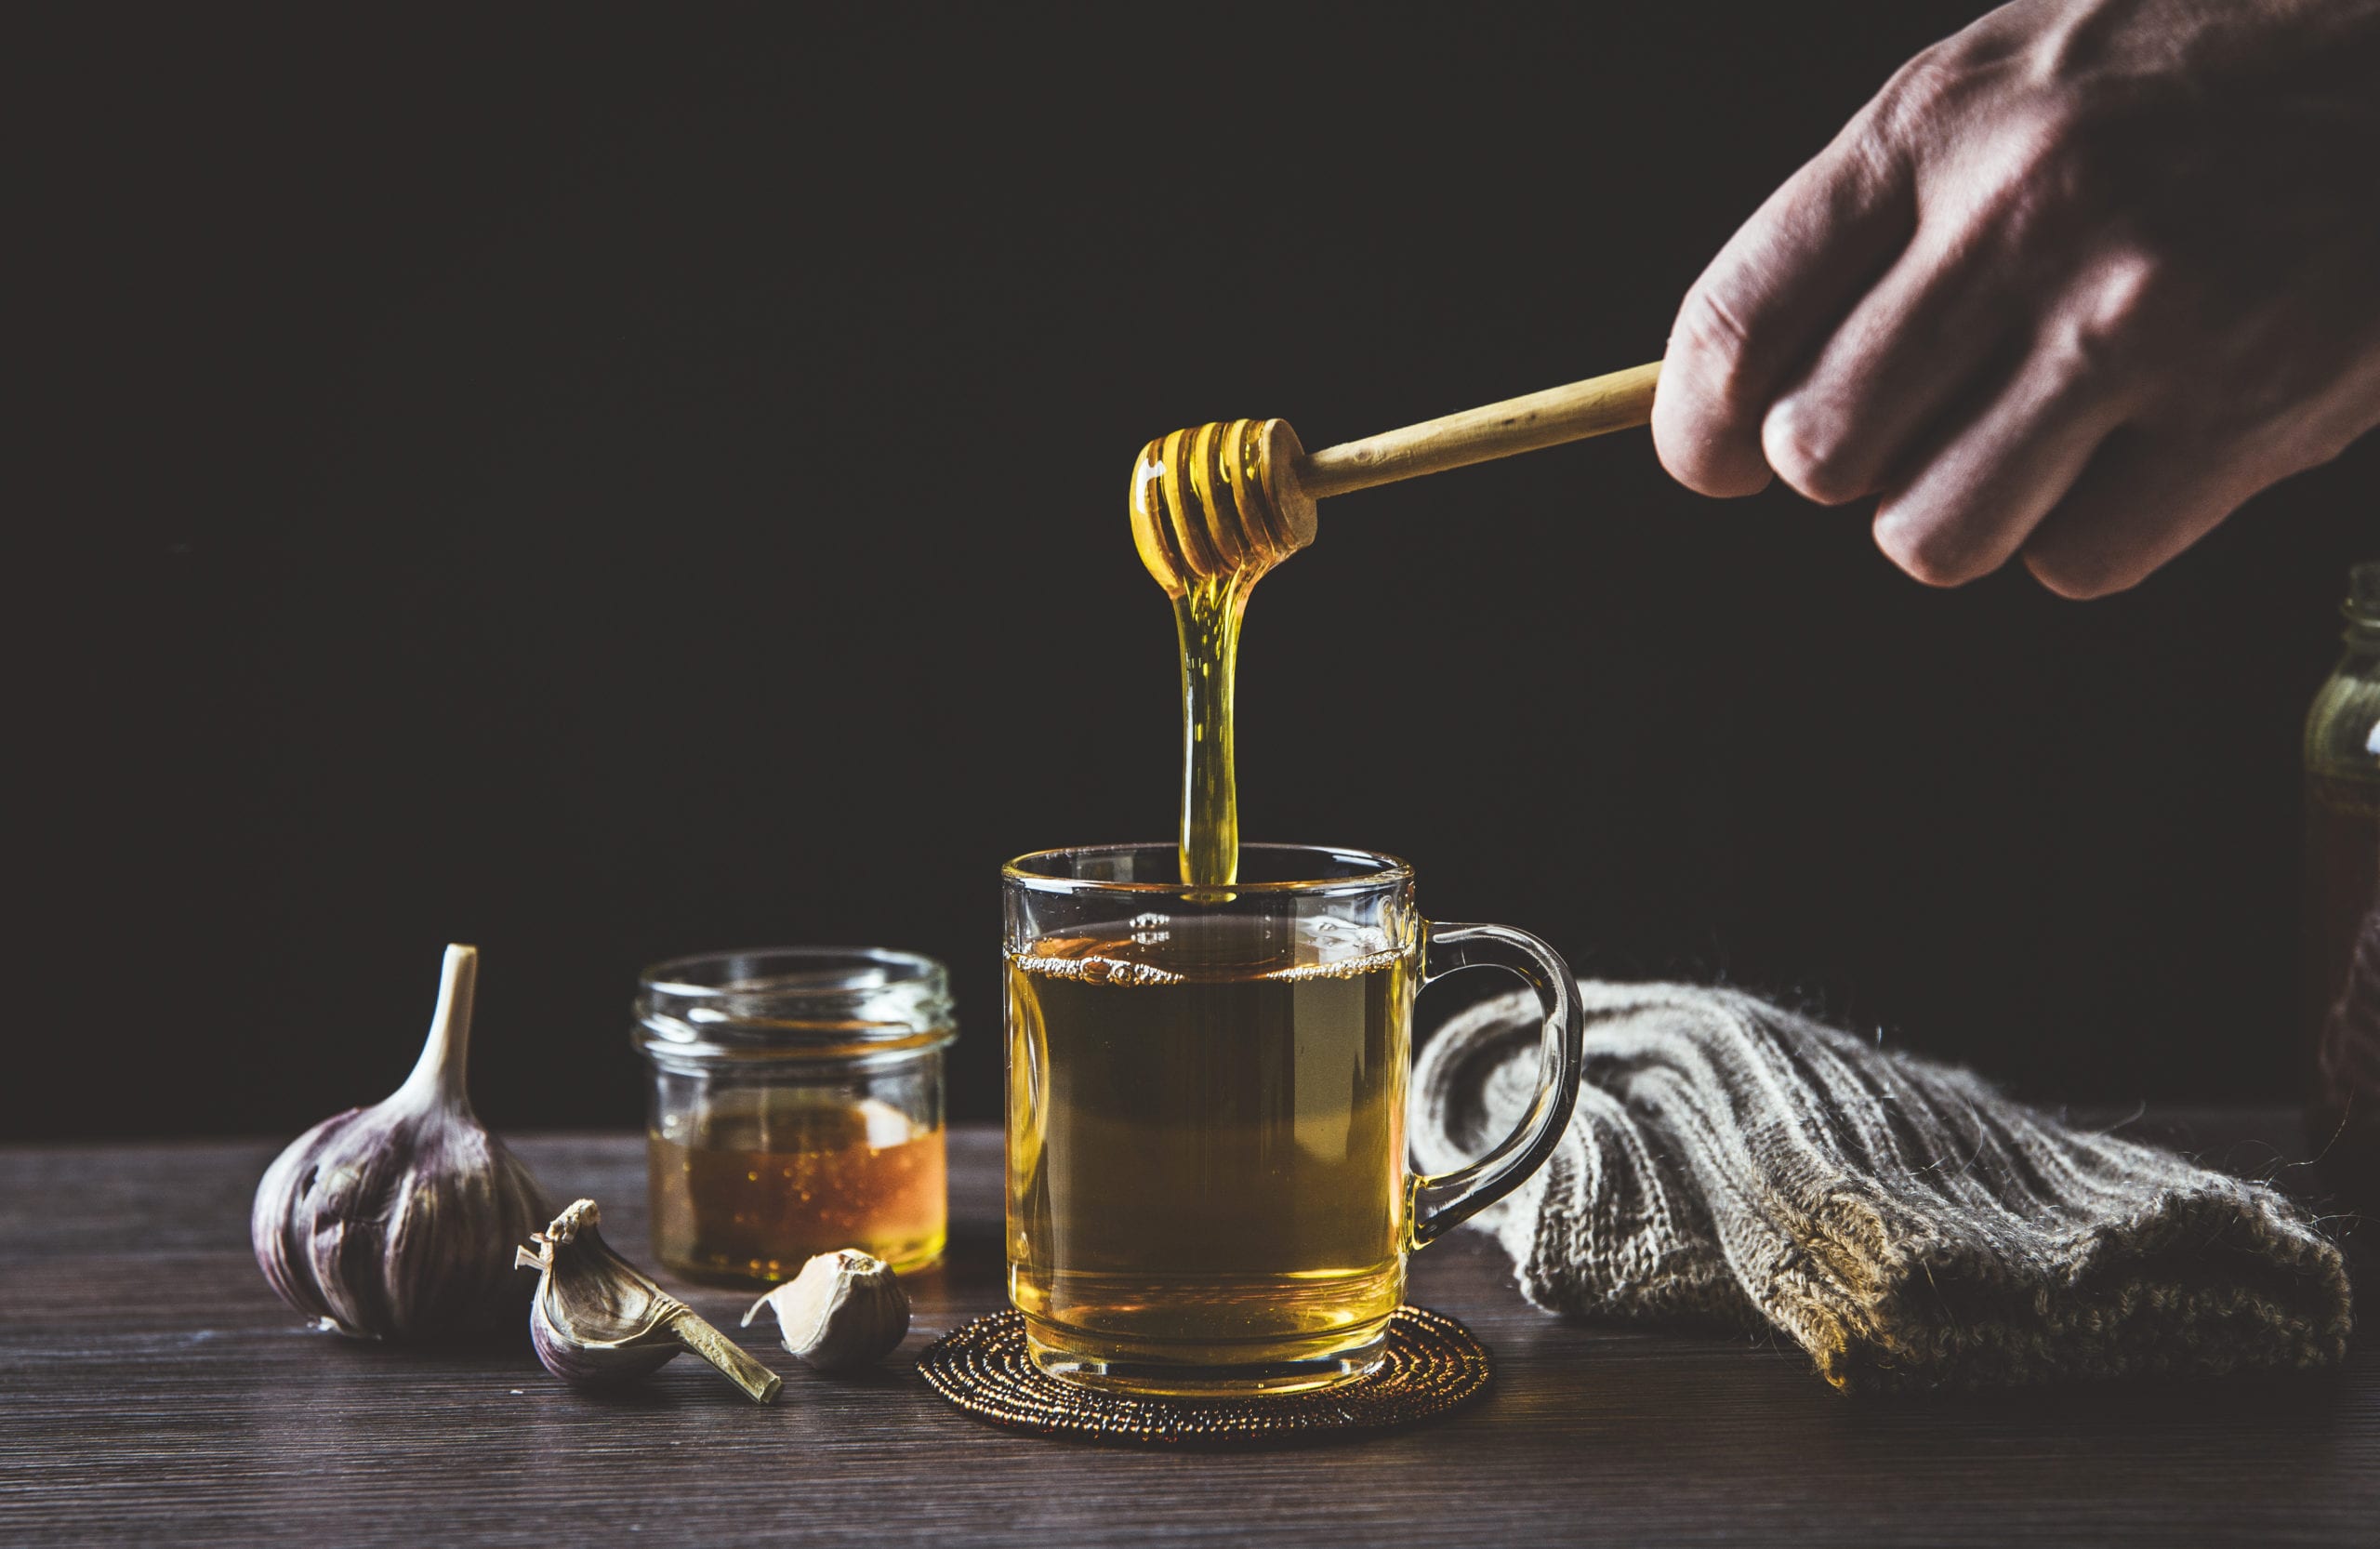 8 NATURAL REMEDIES TO SOOTHE A SORE THROAT